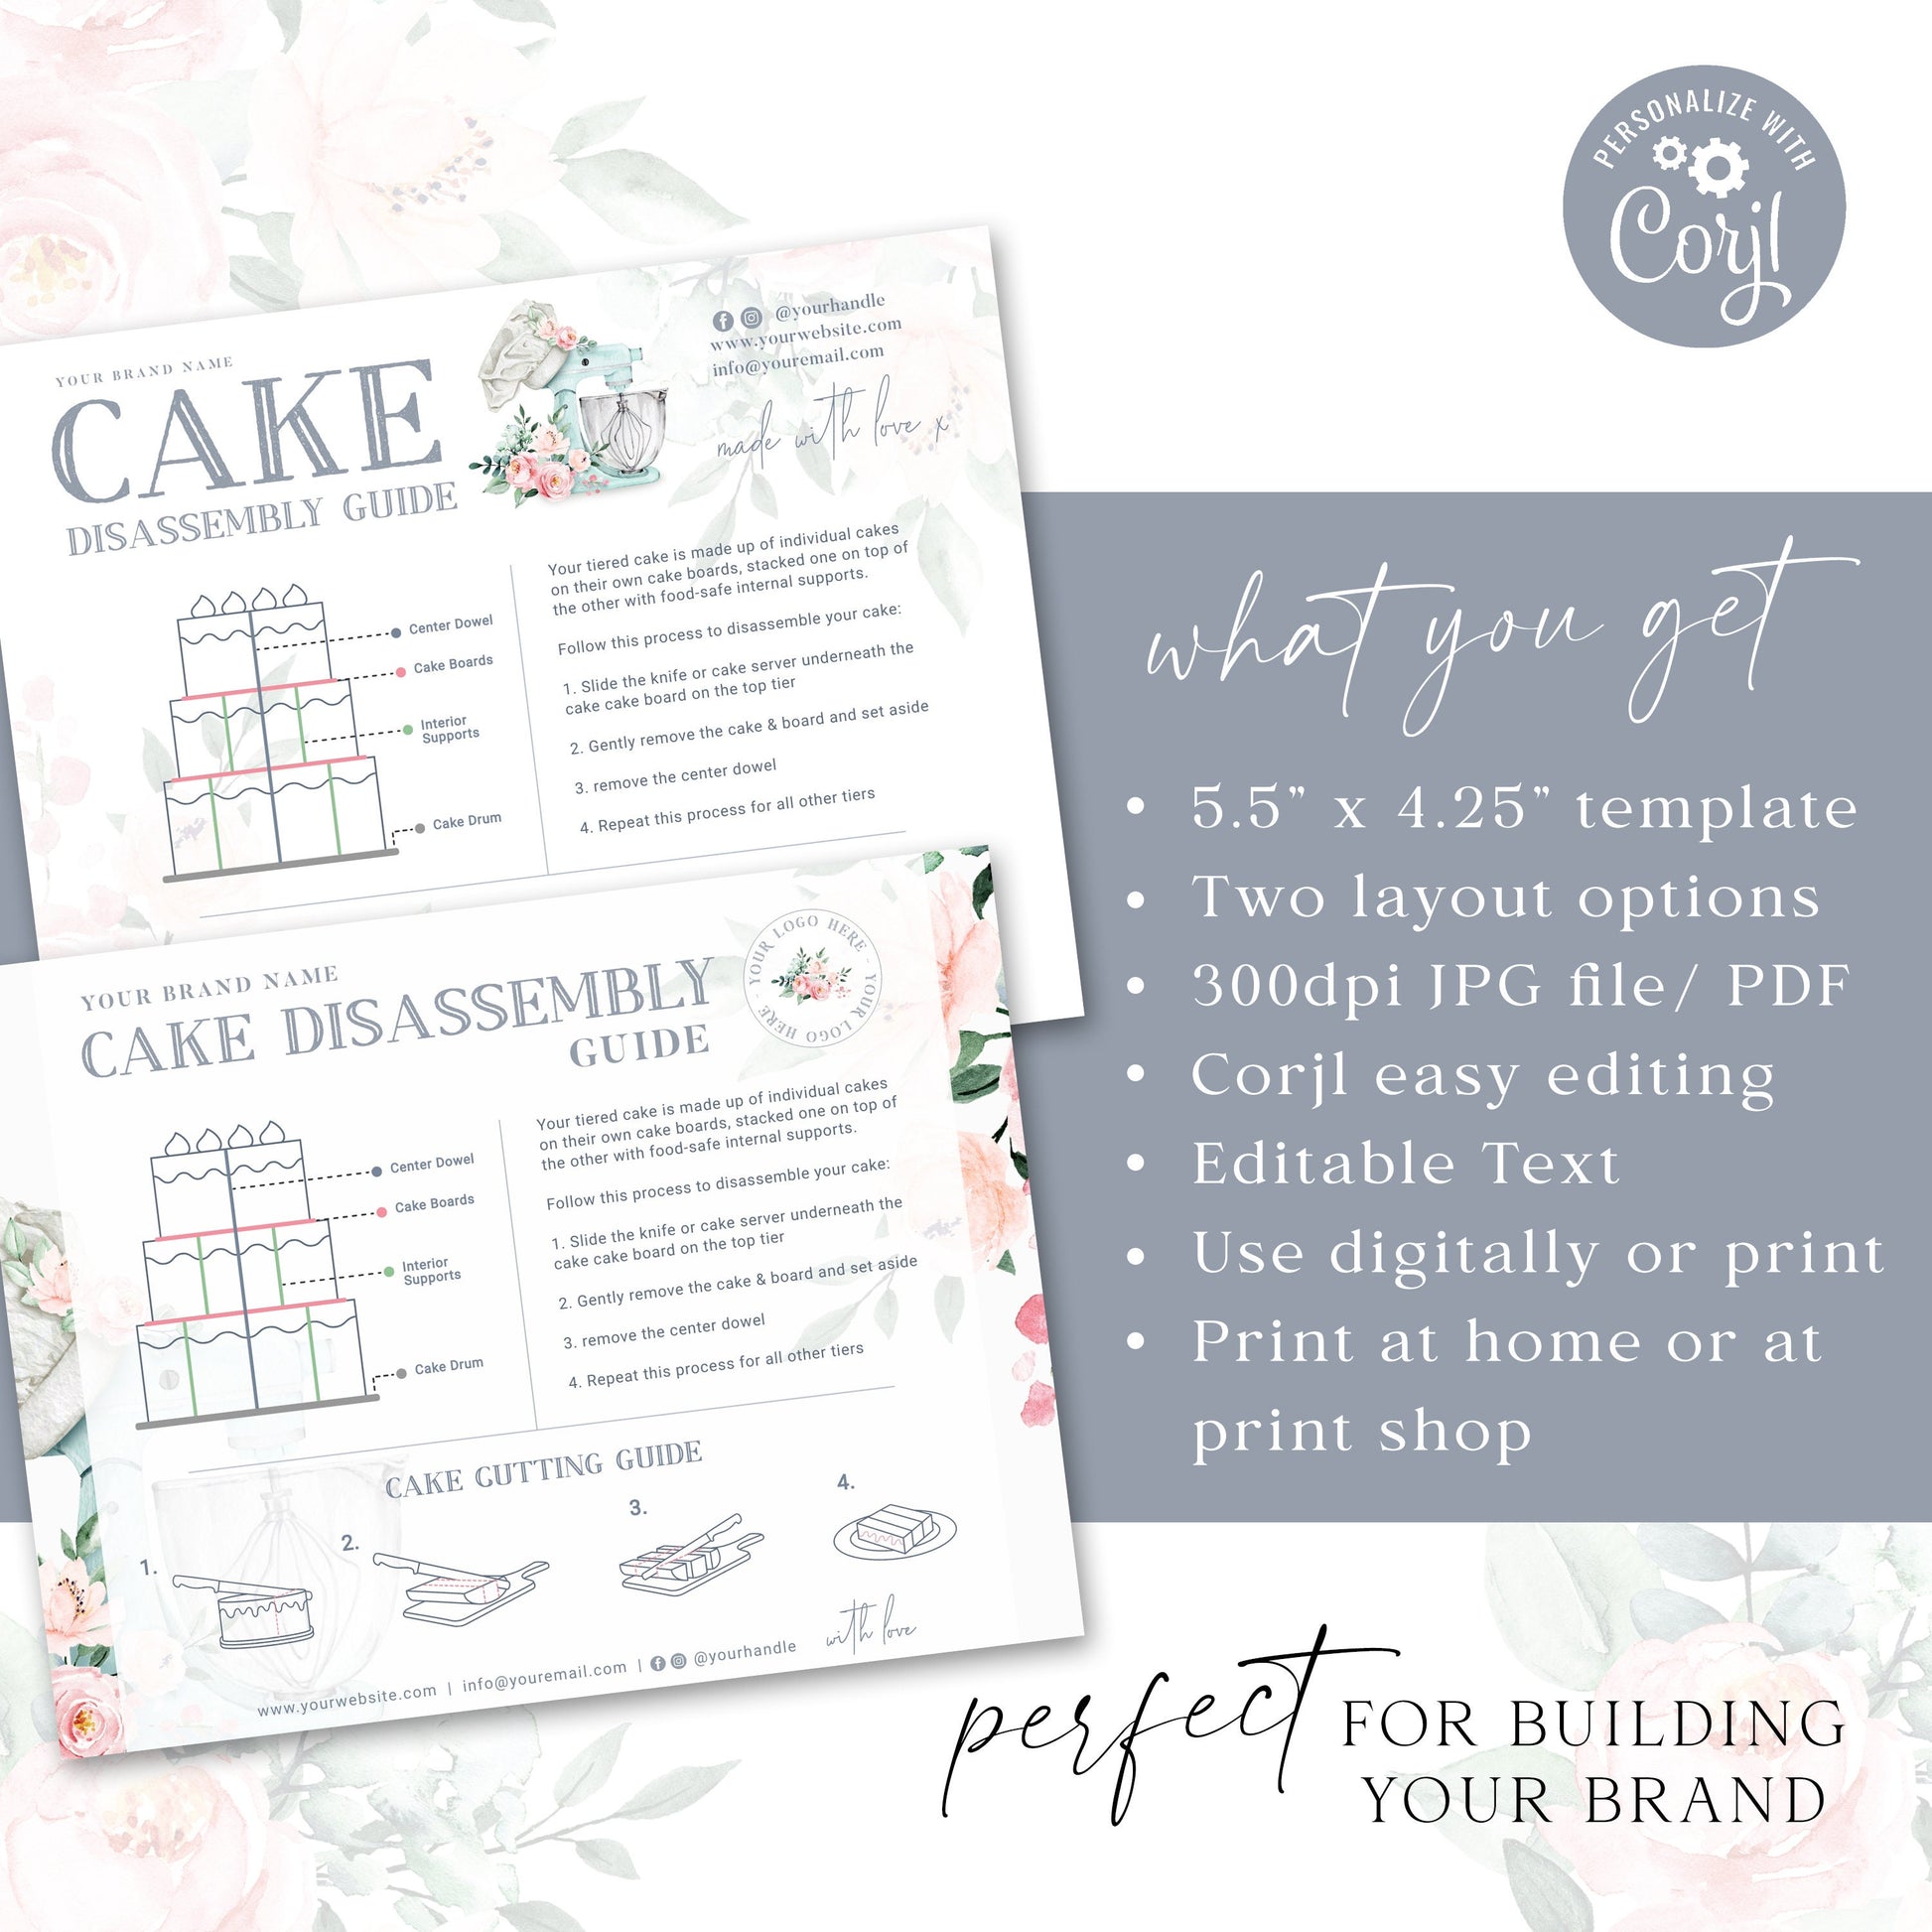 Editable Cake Disassemble Guide Card, Printable Disassembly Template, Watercolor Mixer Bakery Cake Serving Instructions Note JB-001